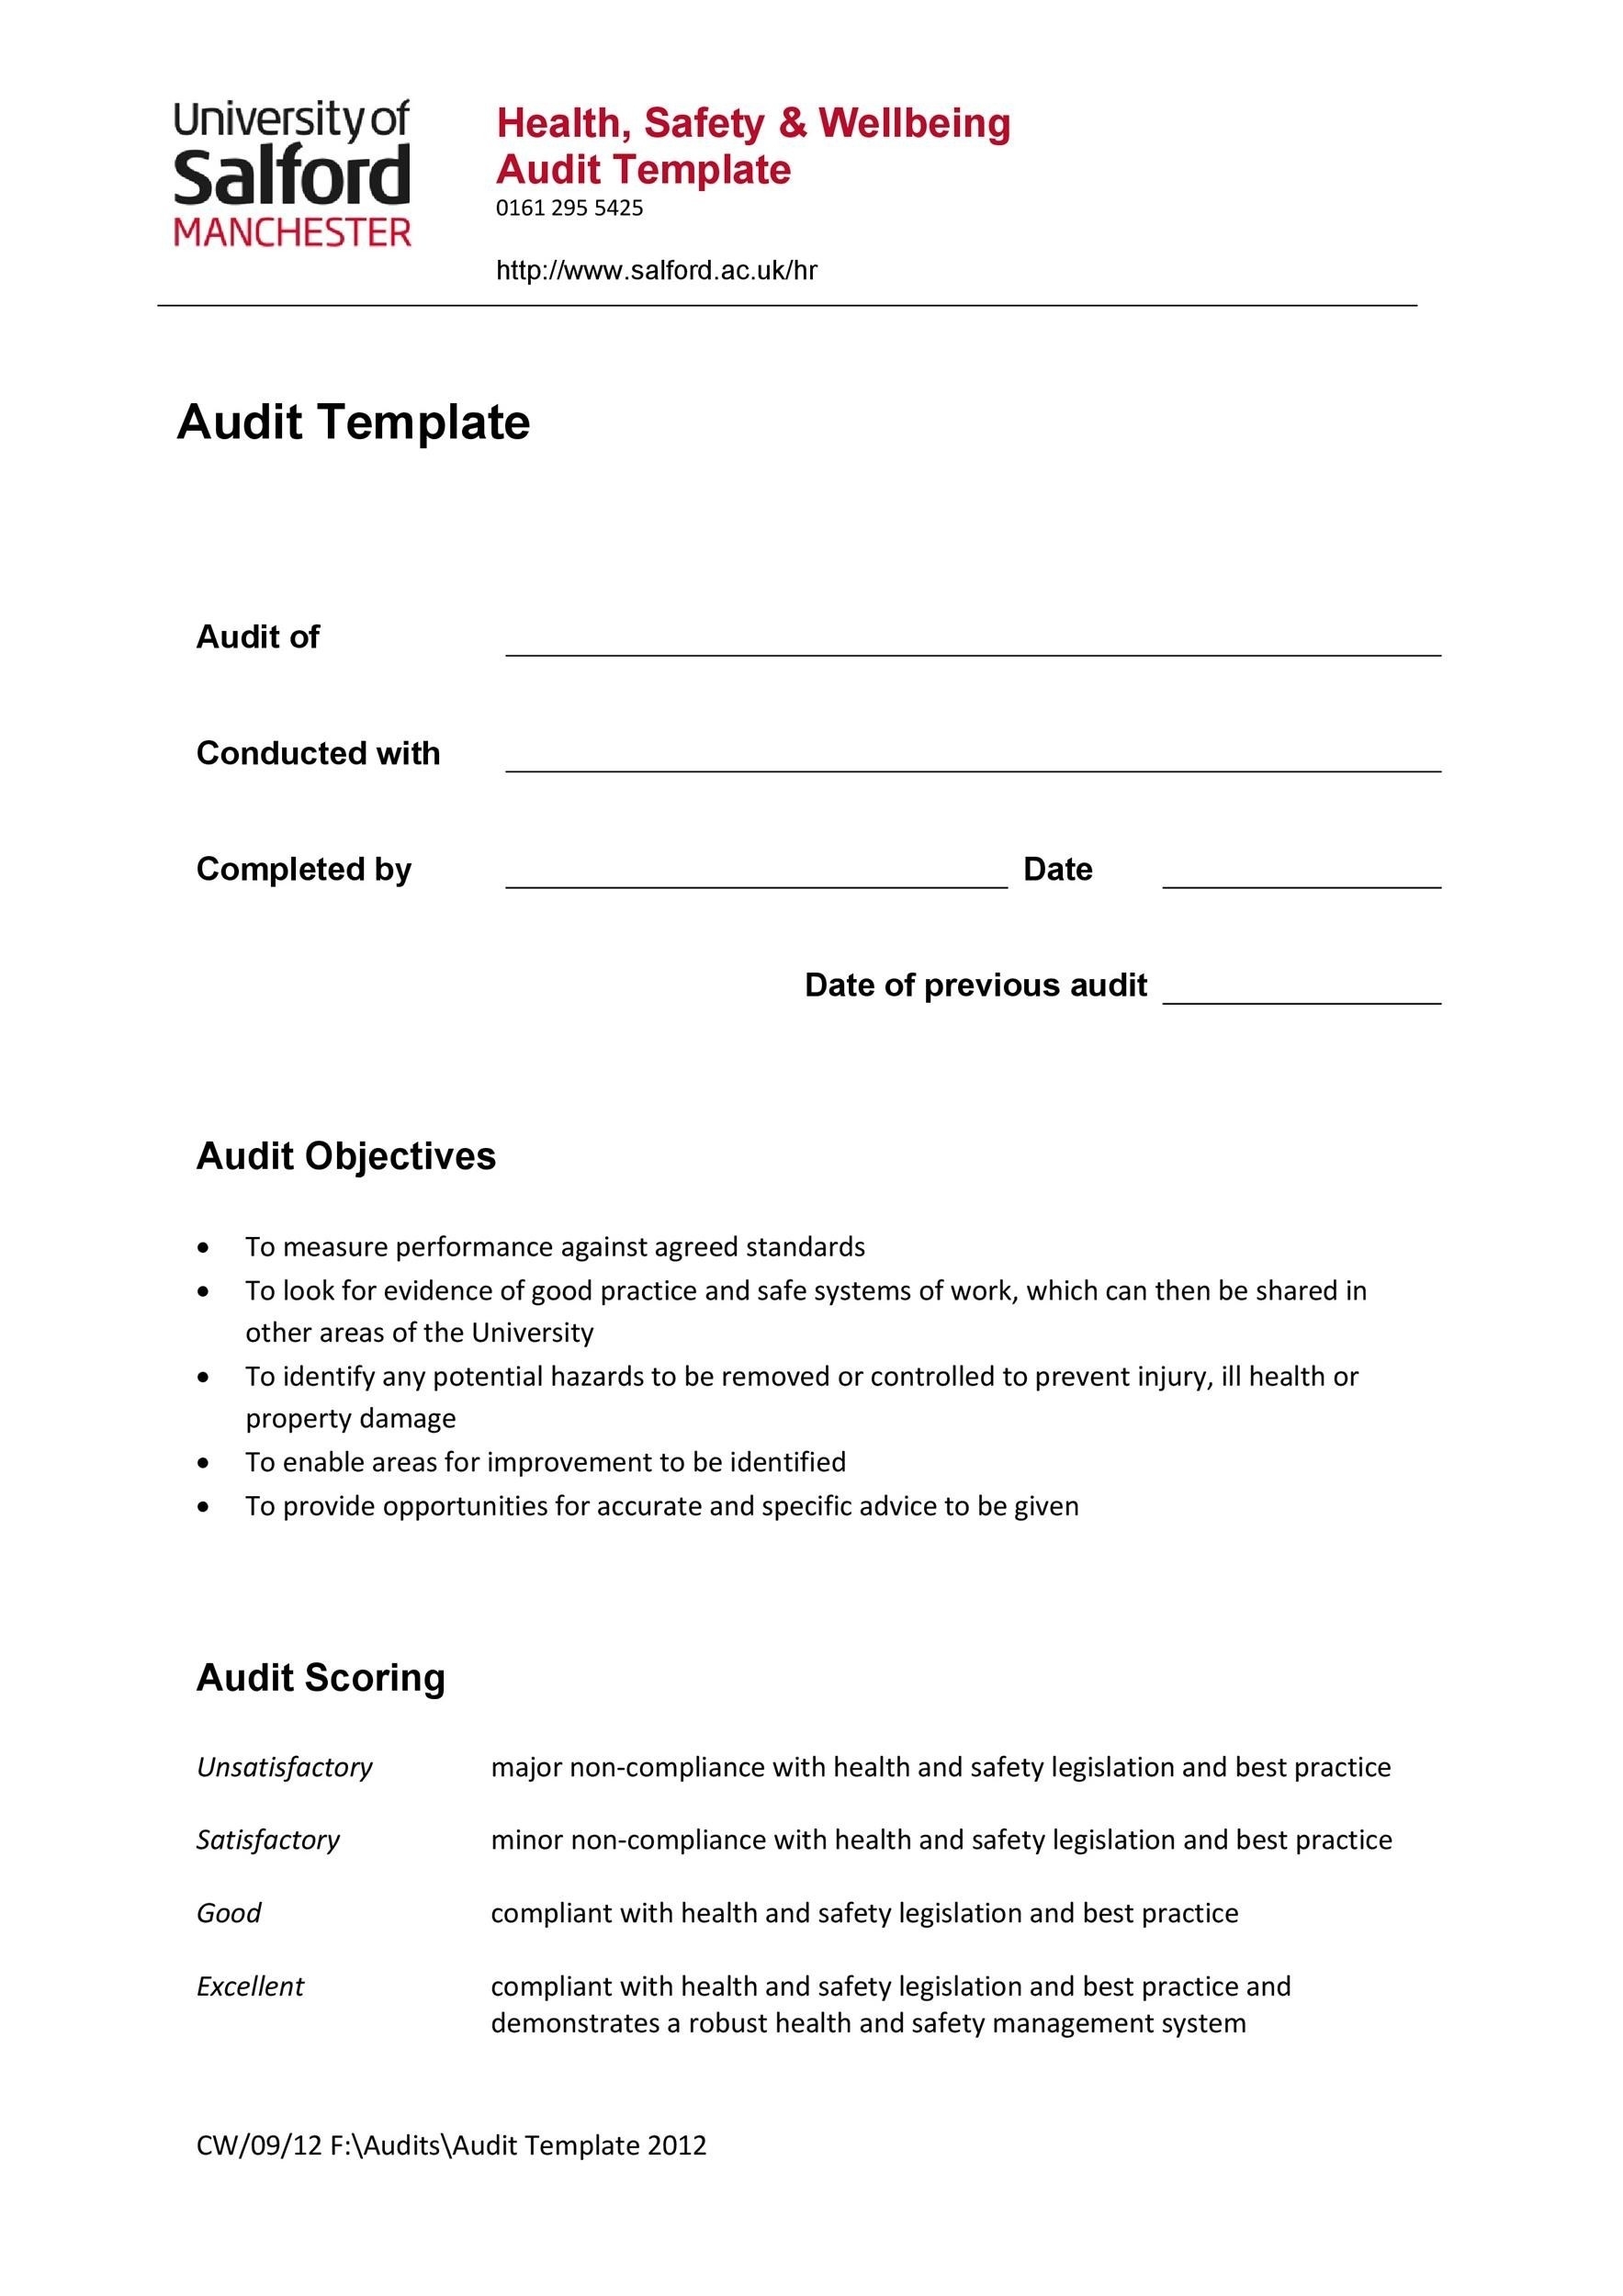 50 Free Audit Report Templates (Internal Audit Reports) ᐅ Templatelab Inside Template For Audit Report